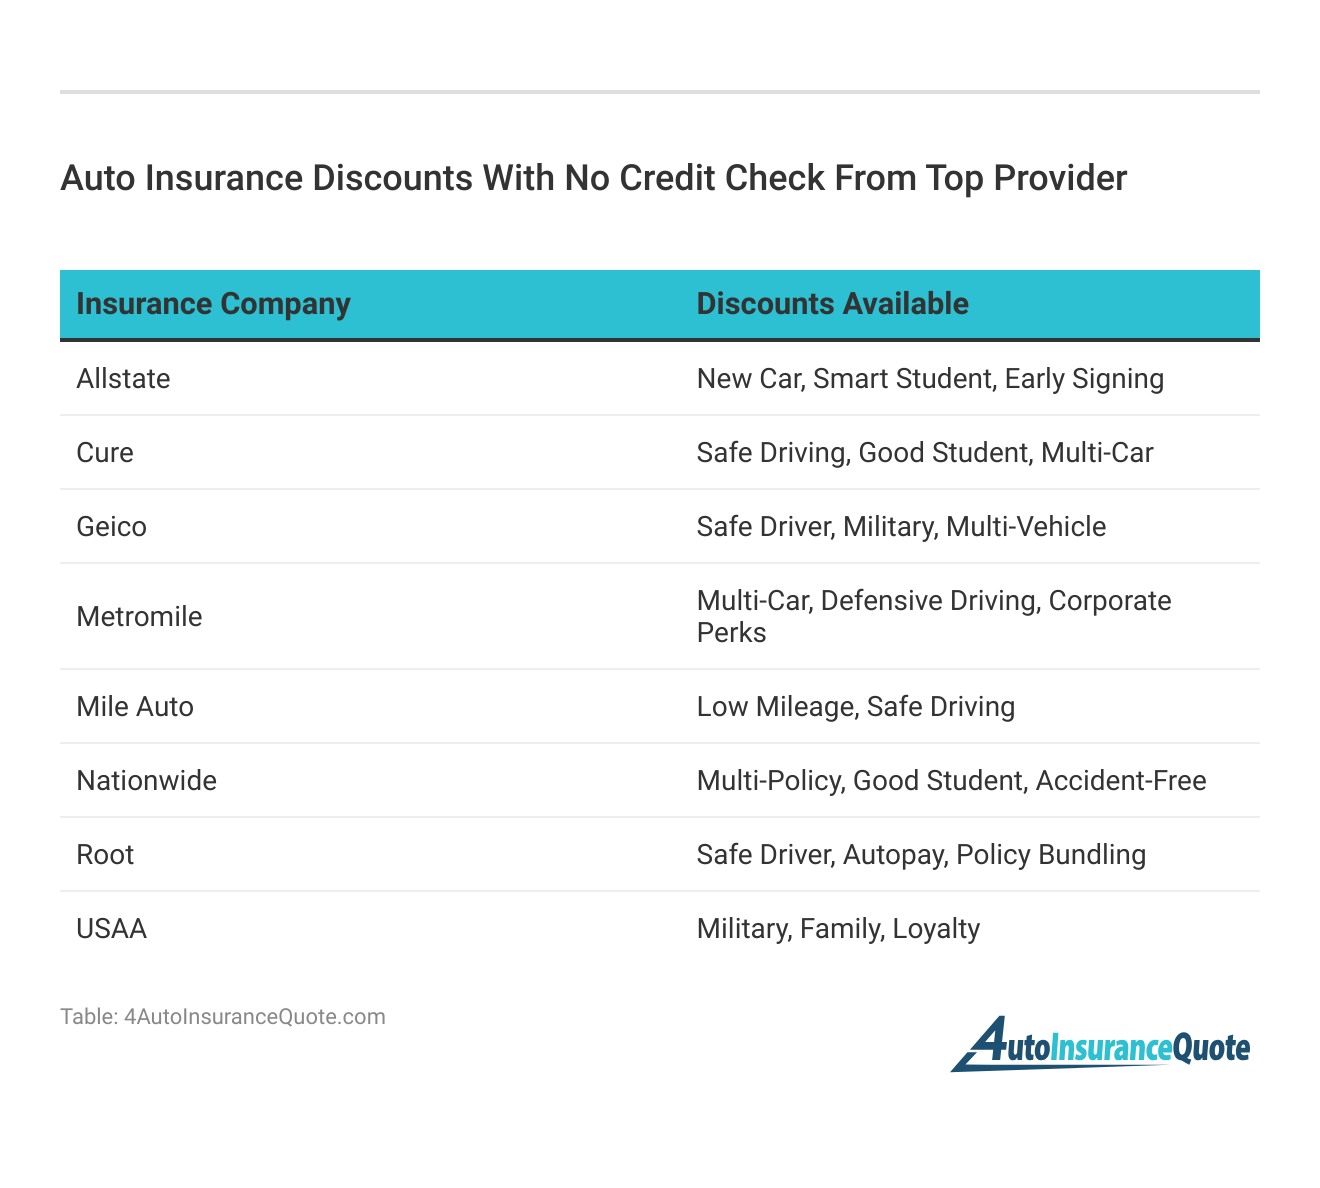 <h3>Auto Insurance Discounts With No Credit Check From Top Provider</h3>